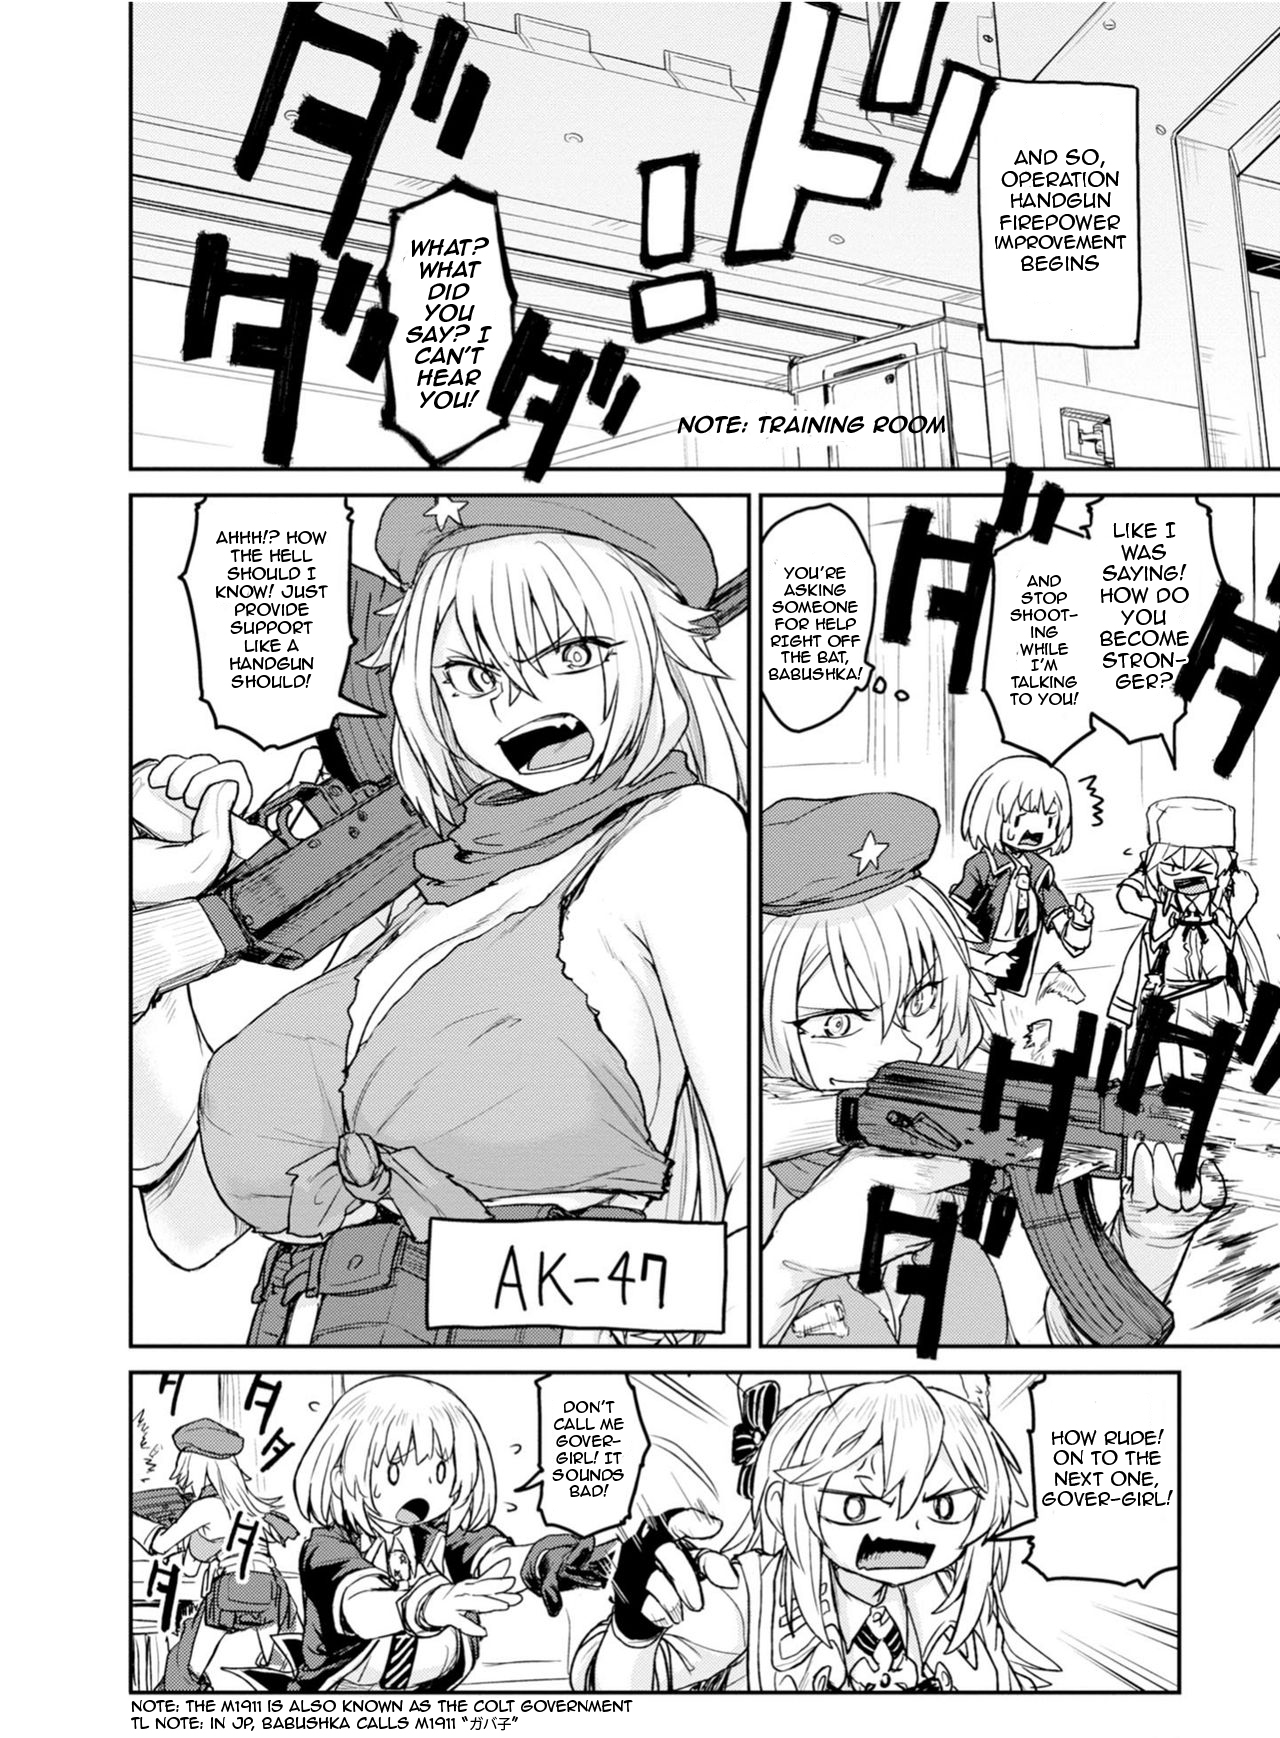 Dolls Frontline Comic anthology Vol. 1 Ch. 4 An Insoluble Problem